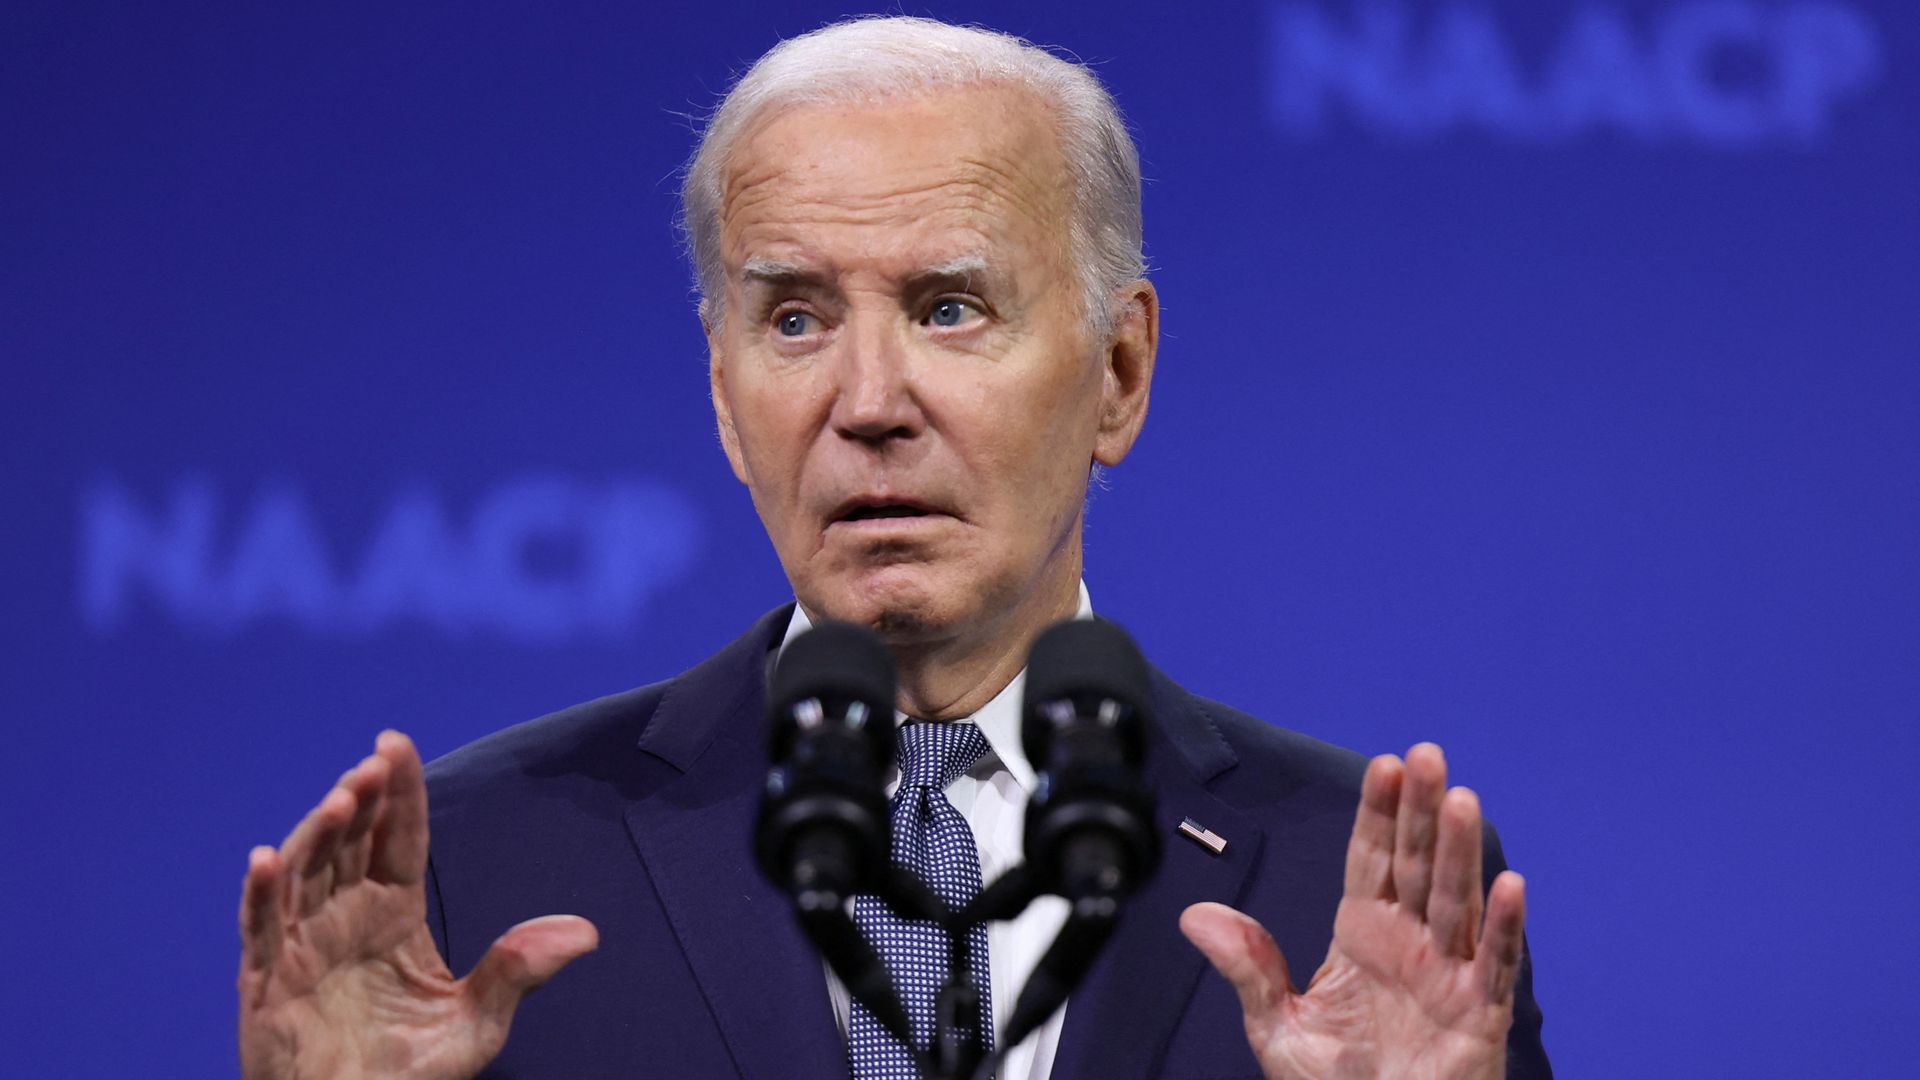 Is Joe Biden going to jump - or are the Democrats preparing to push him?